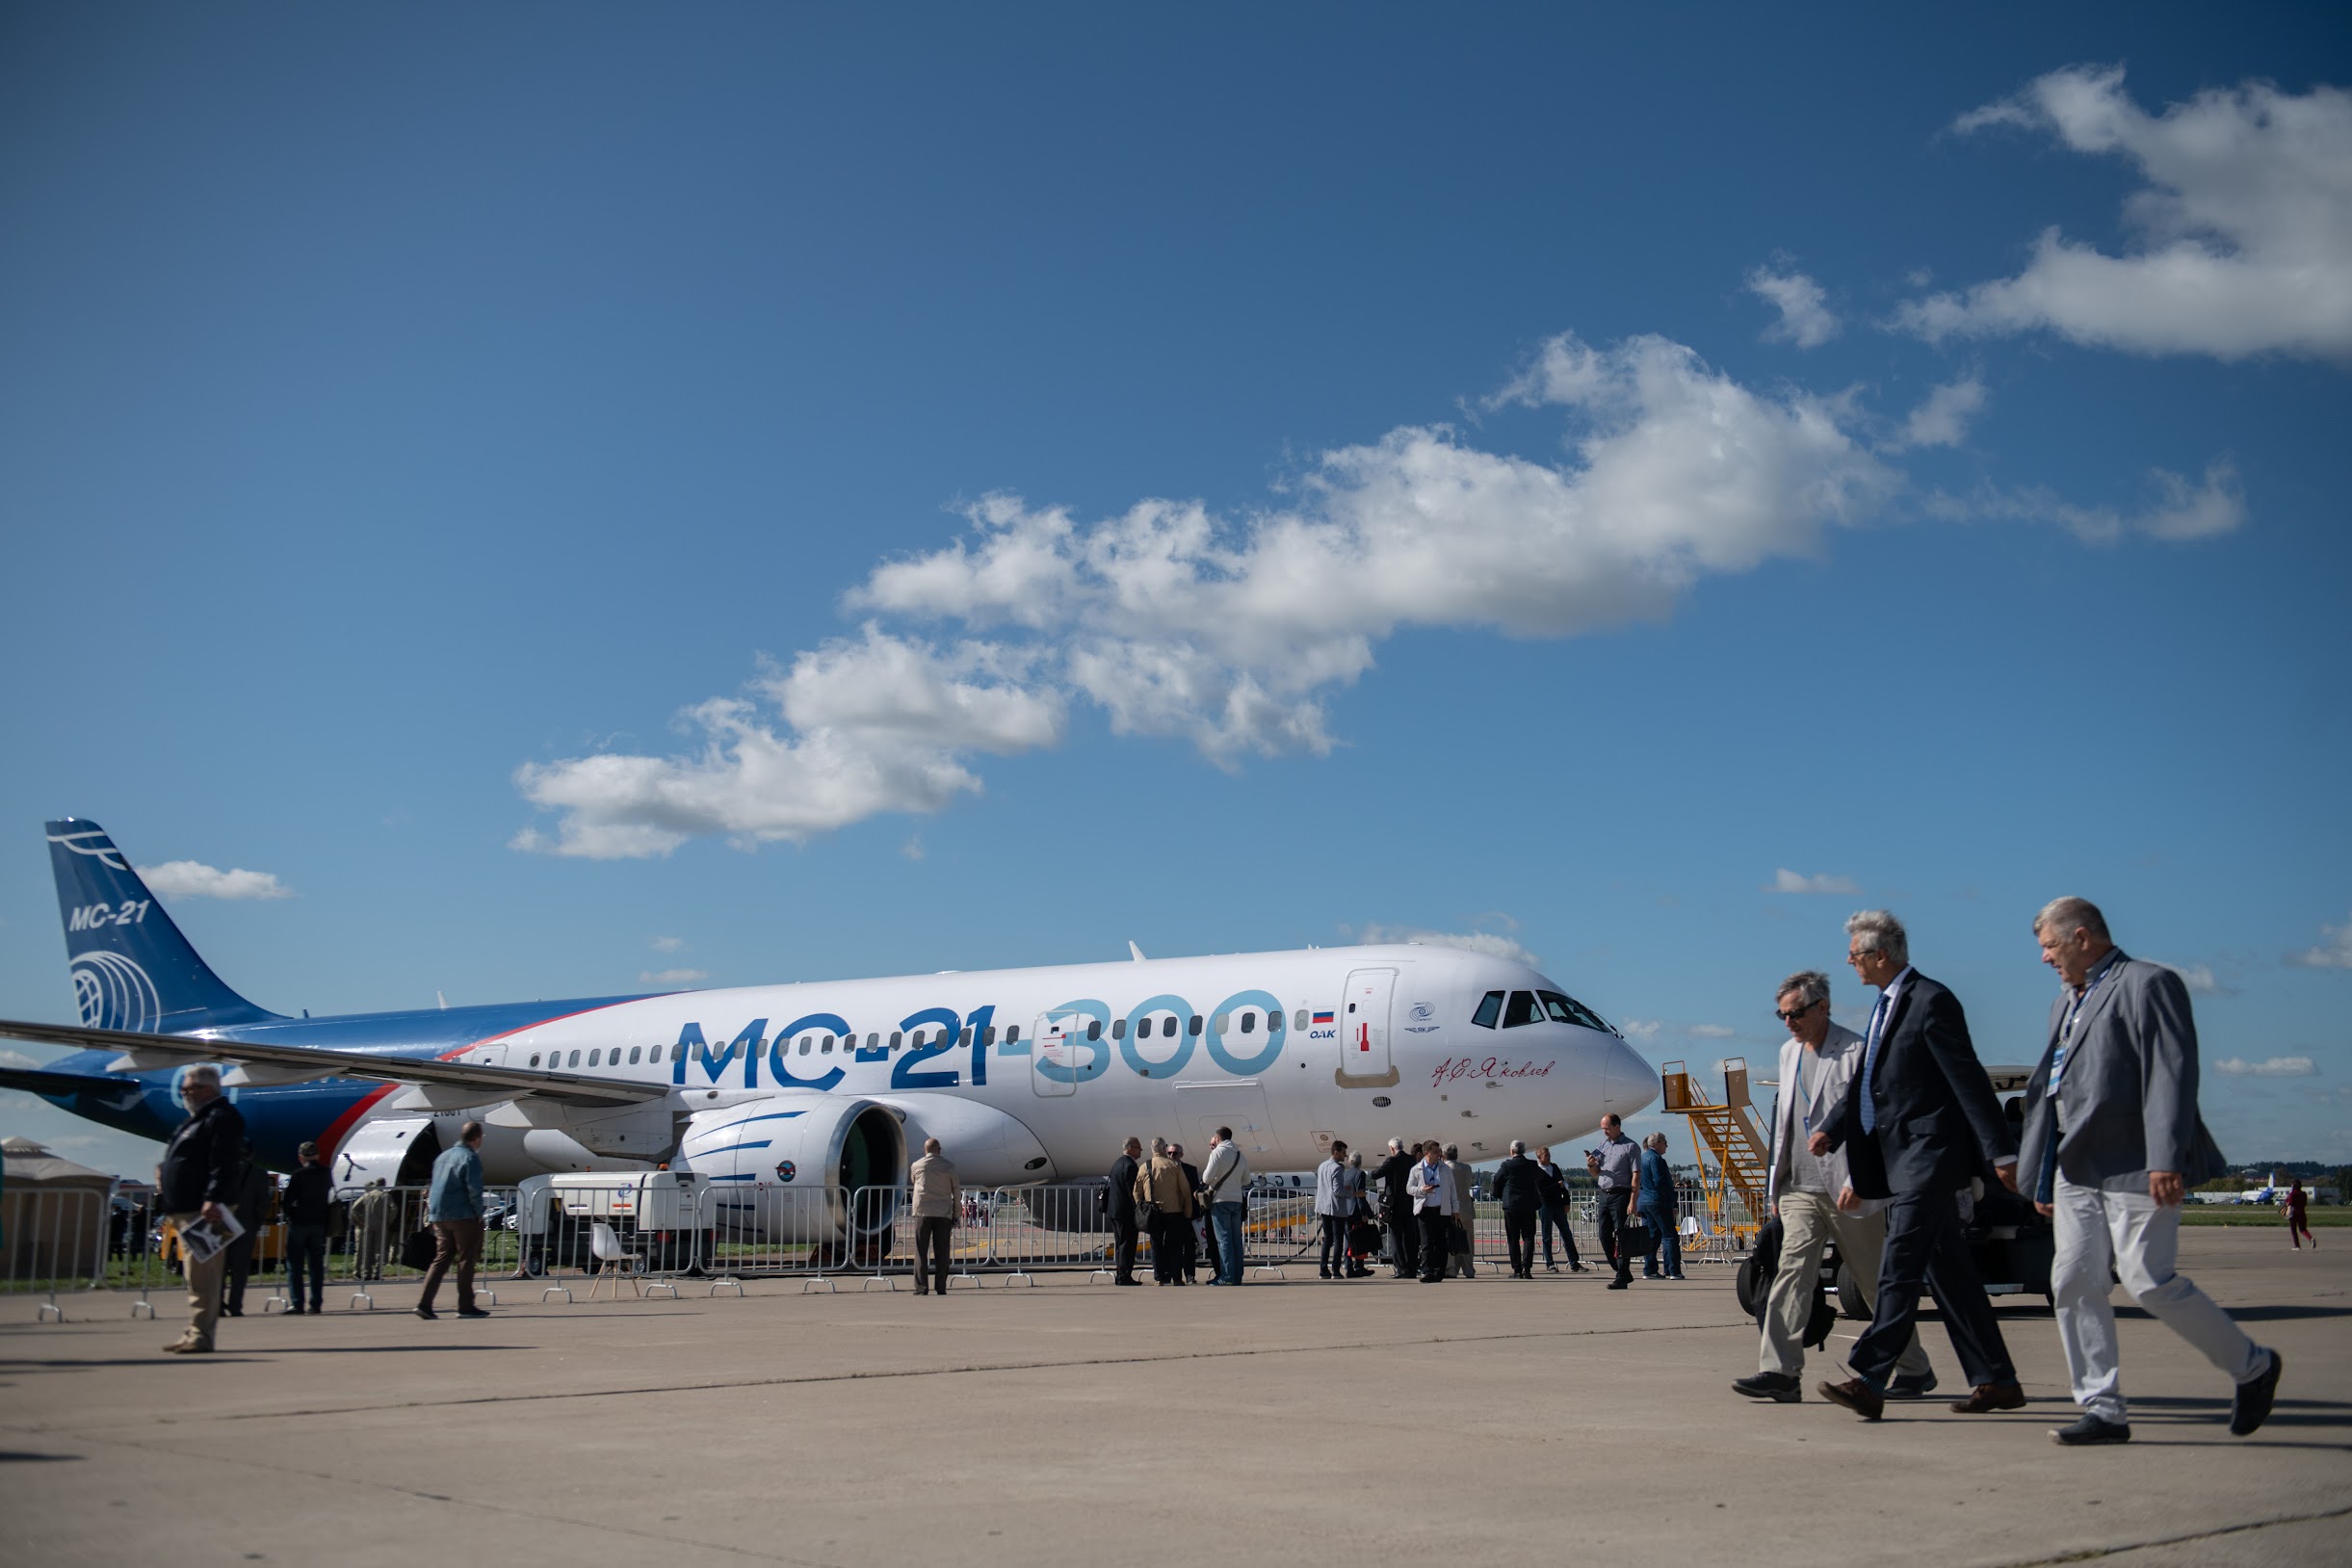 Rostec has Signed Contracts for Production of 71 Passenger Airliners and 107 Helicopters